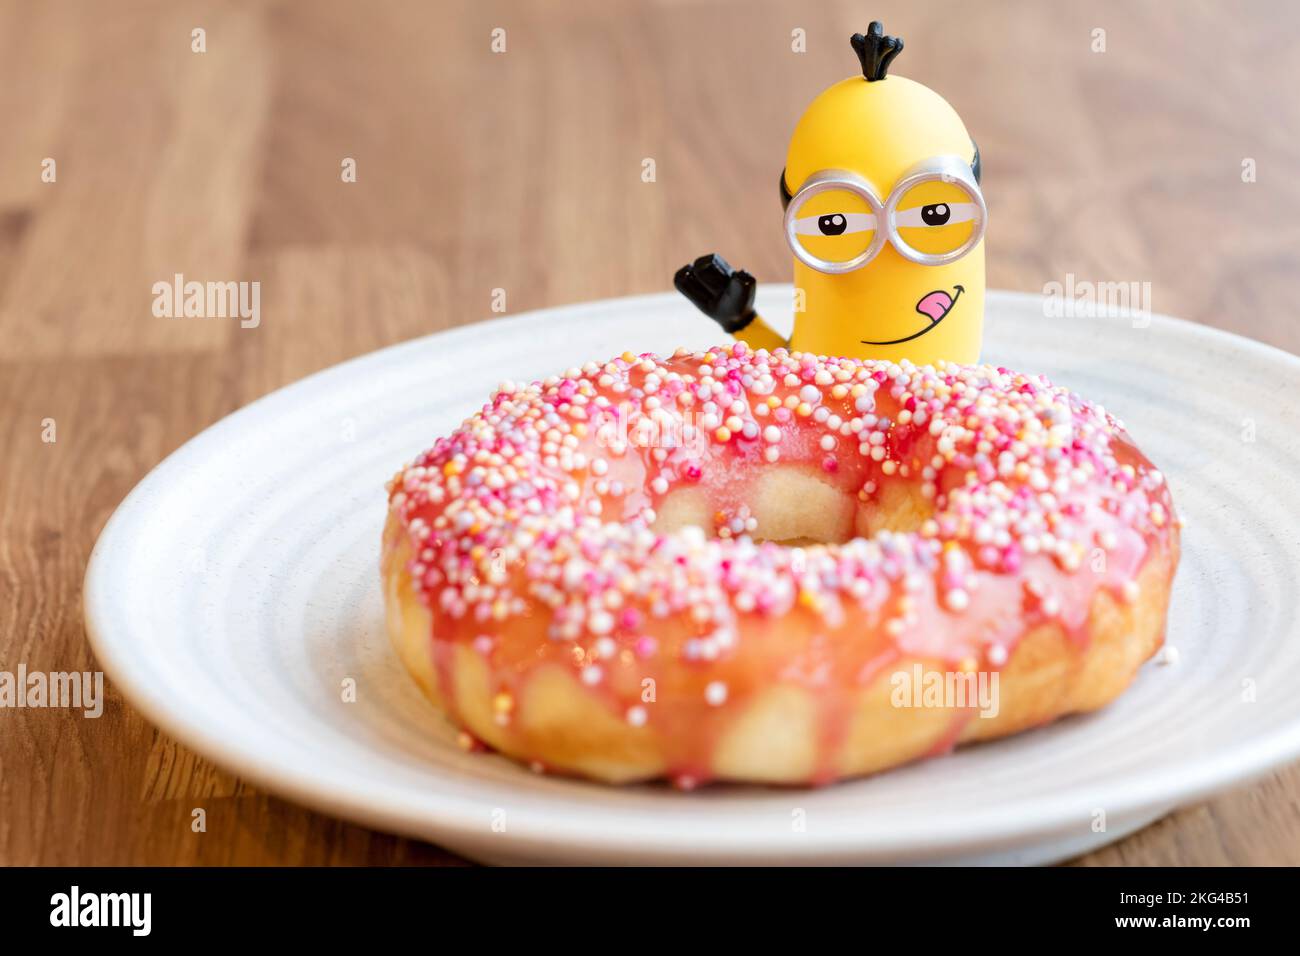 A toy model of The Minion character Kevin looks down on a home made Air Fryer baked glazed doughnut. The doughnut has a pink glaze and sprinkles Stock Photo